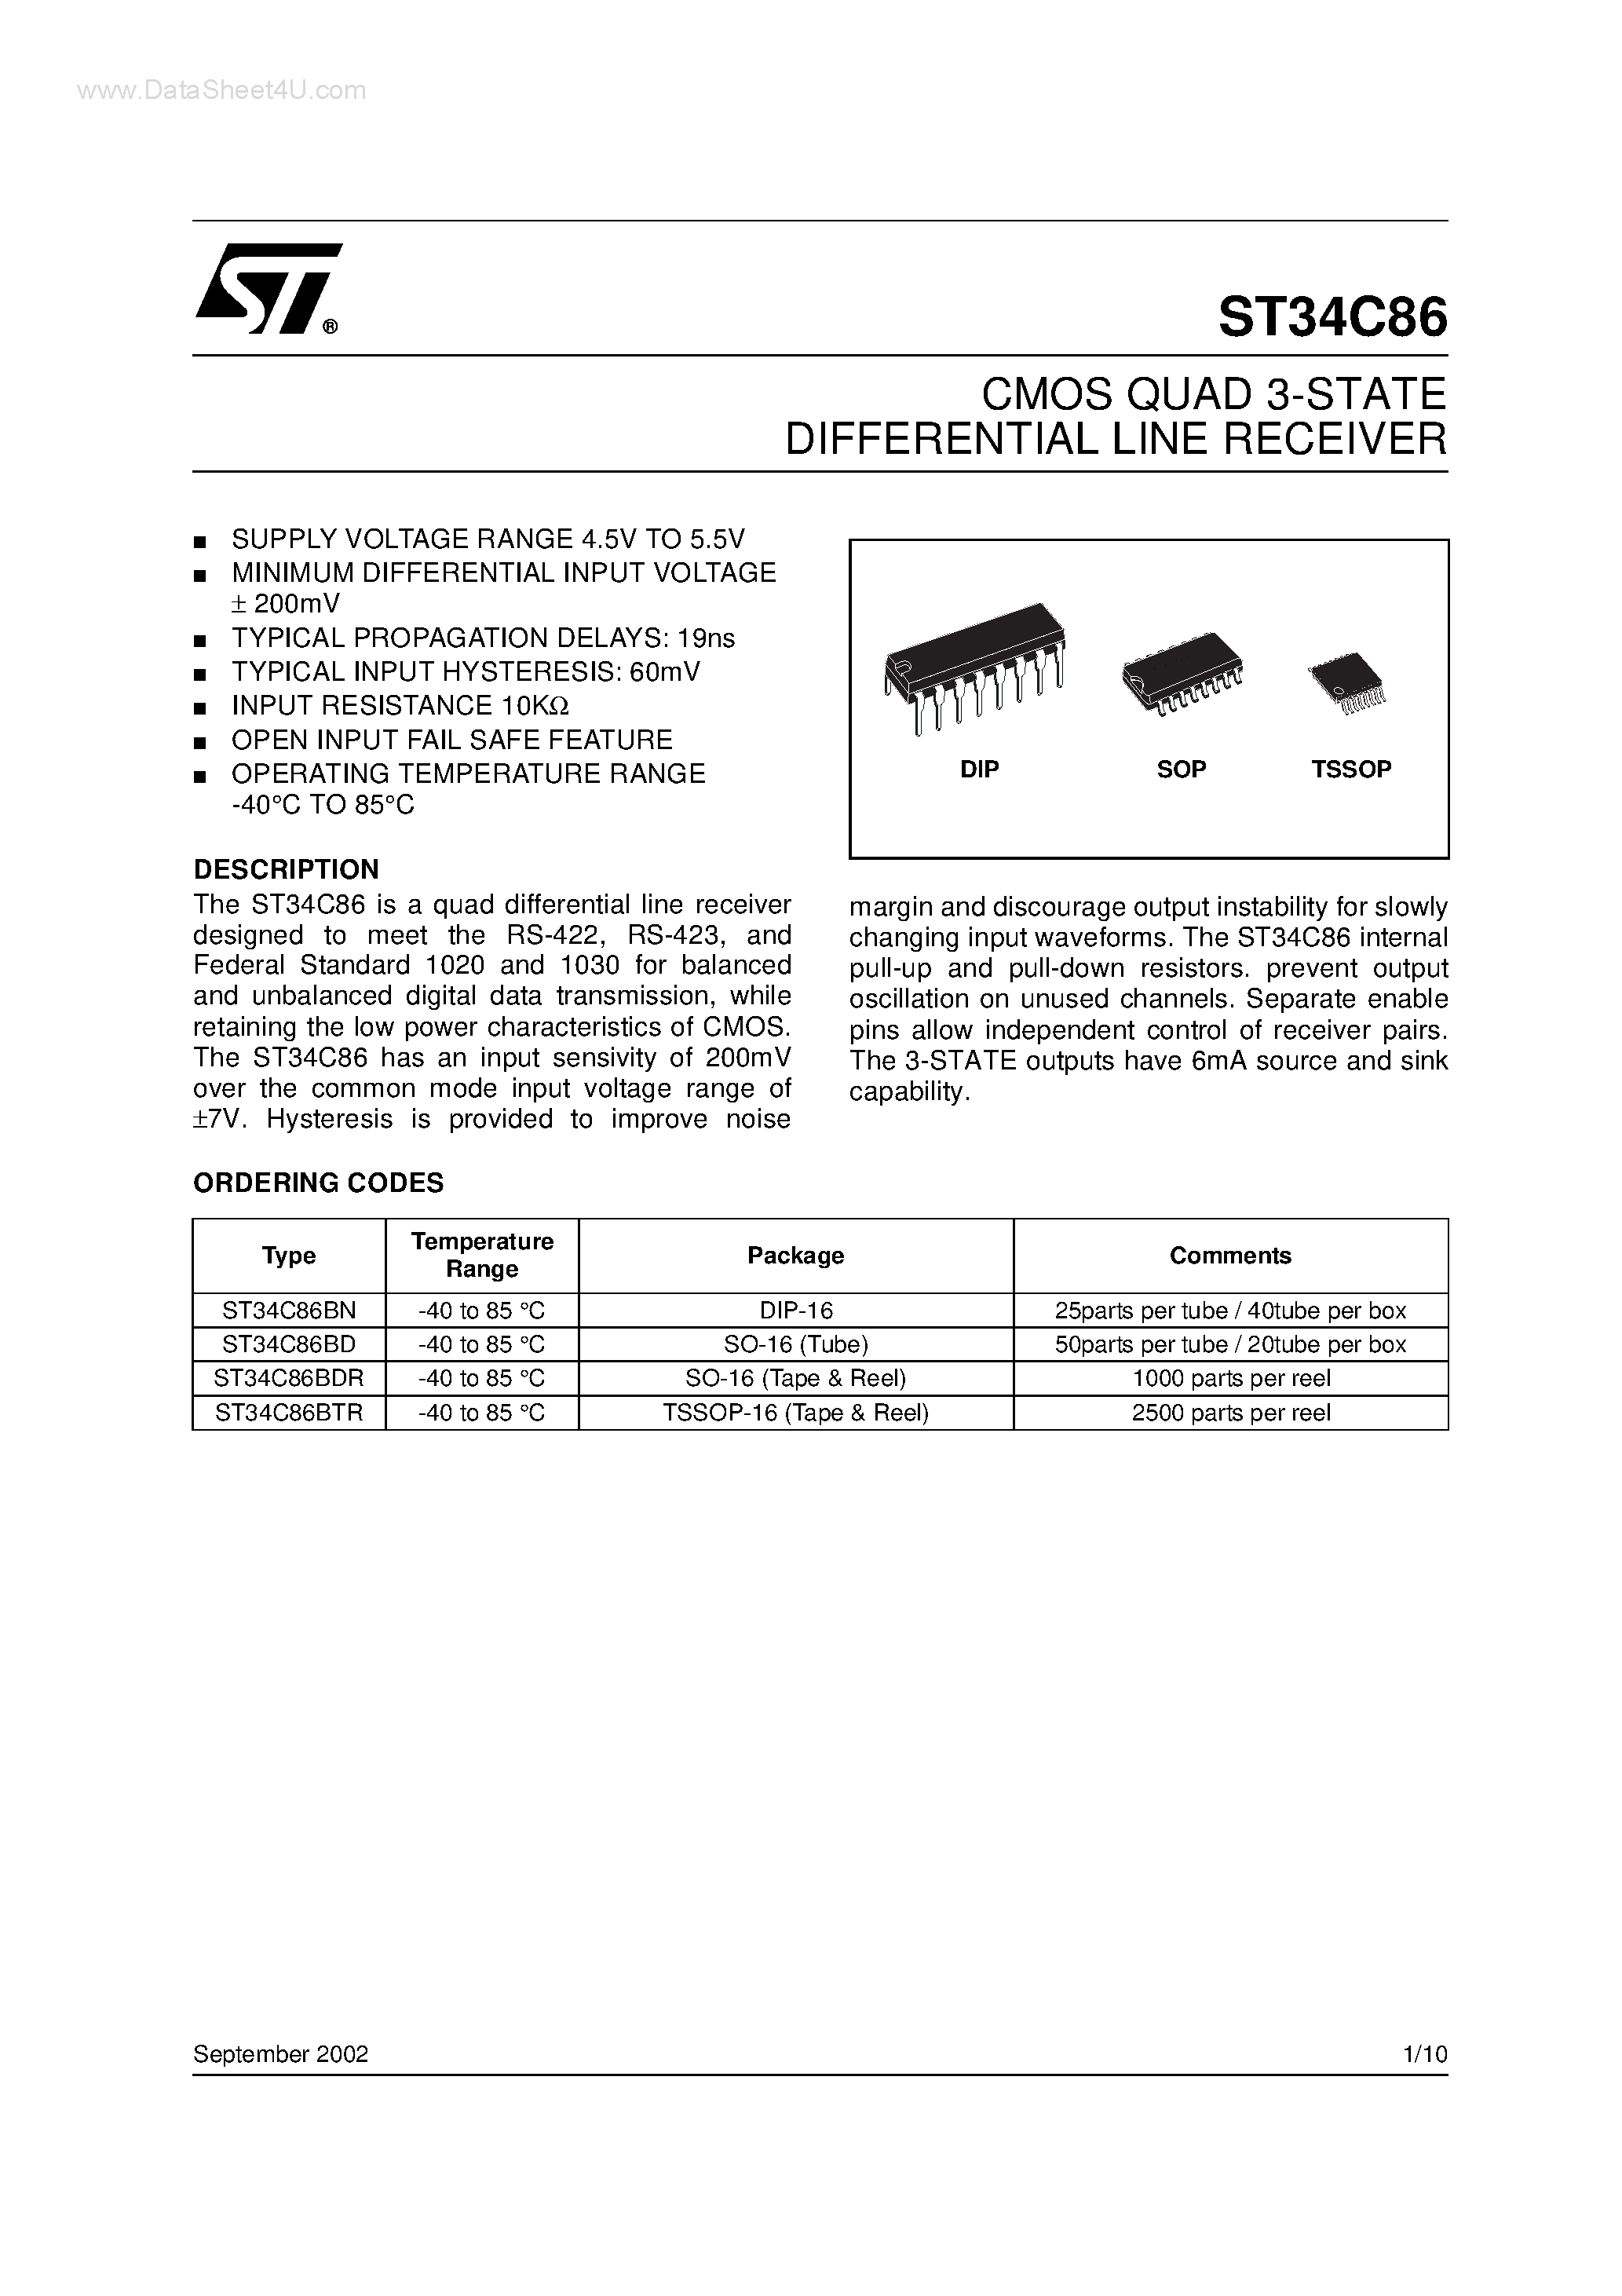 Datasheet ST34C86 - CMOS QUAD 3-STATE DIFFERENTIAL LINE RECEIVER page 1